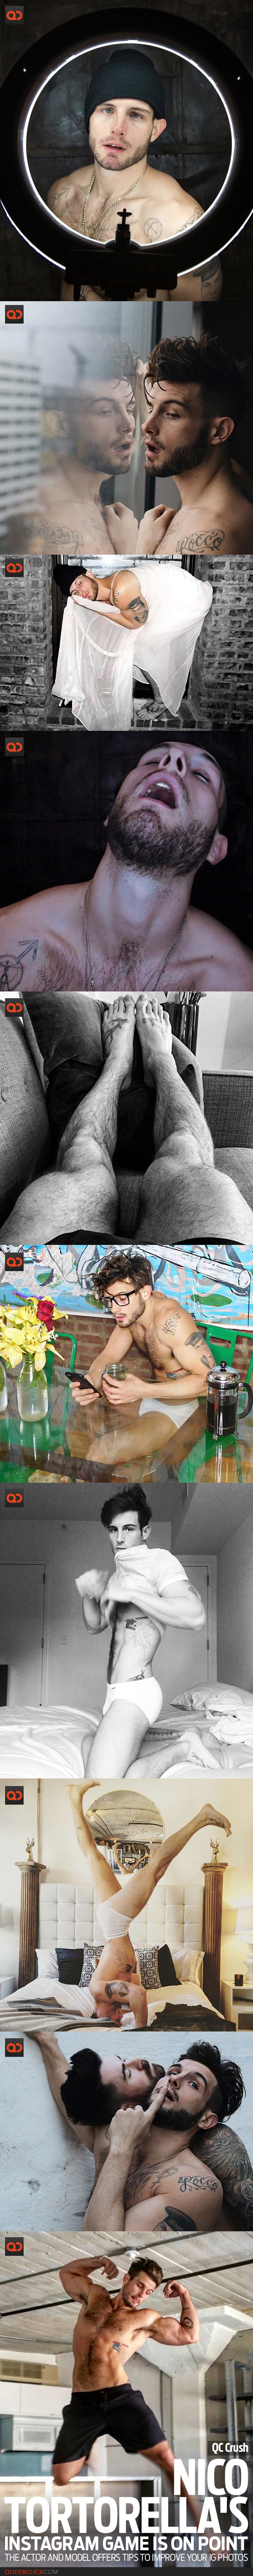 Nico Tortorella's Instagram Game Is On Point - The Actor And Model Offers Tips To Improve Your IG Photos